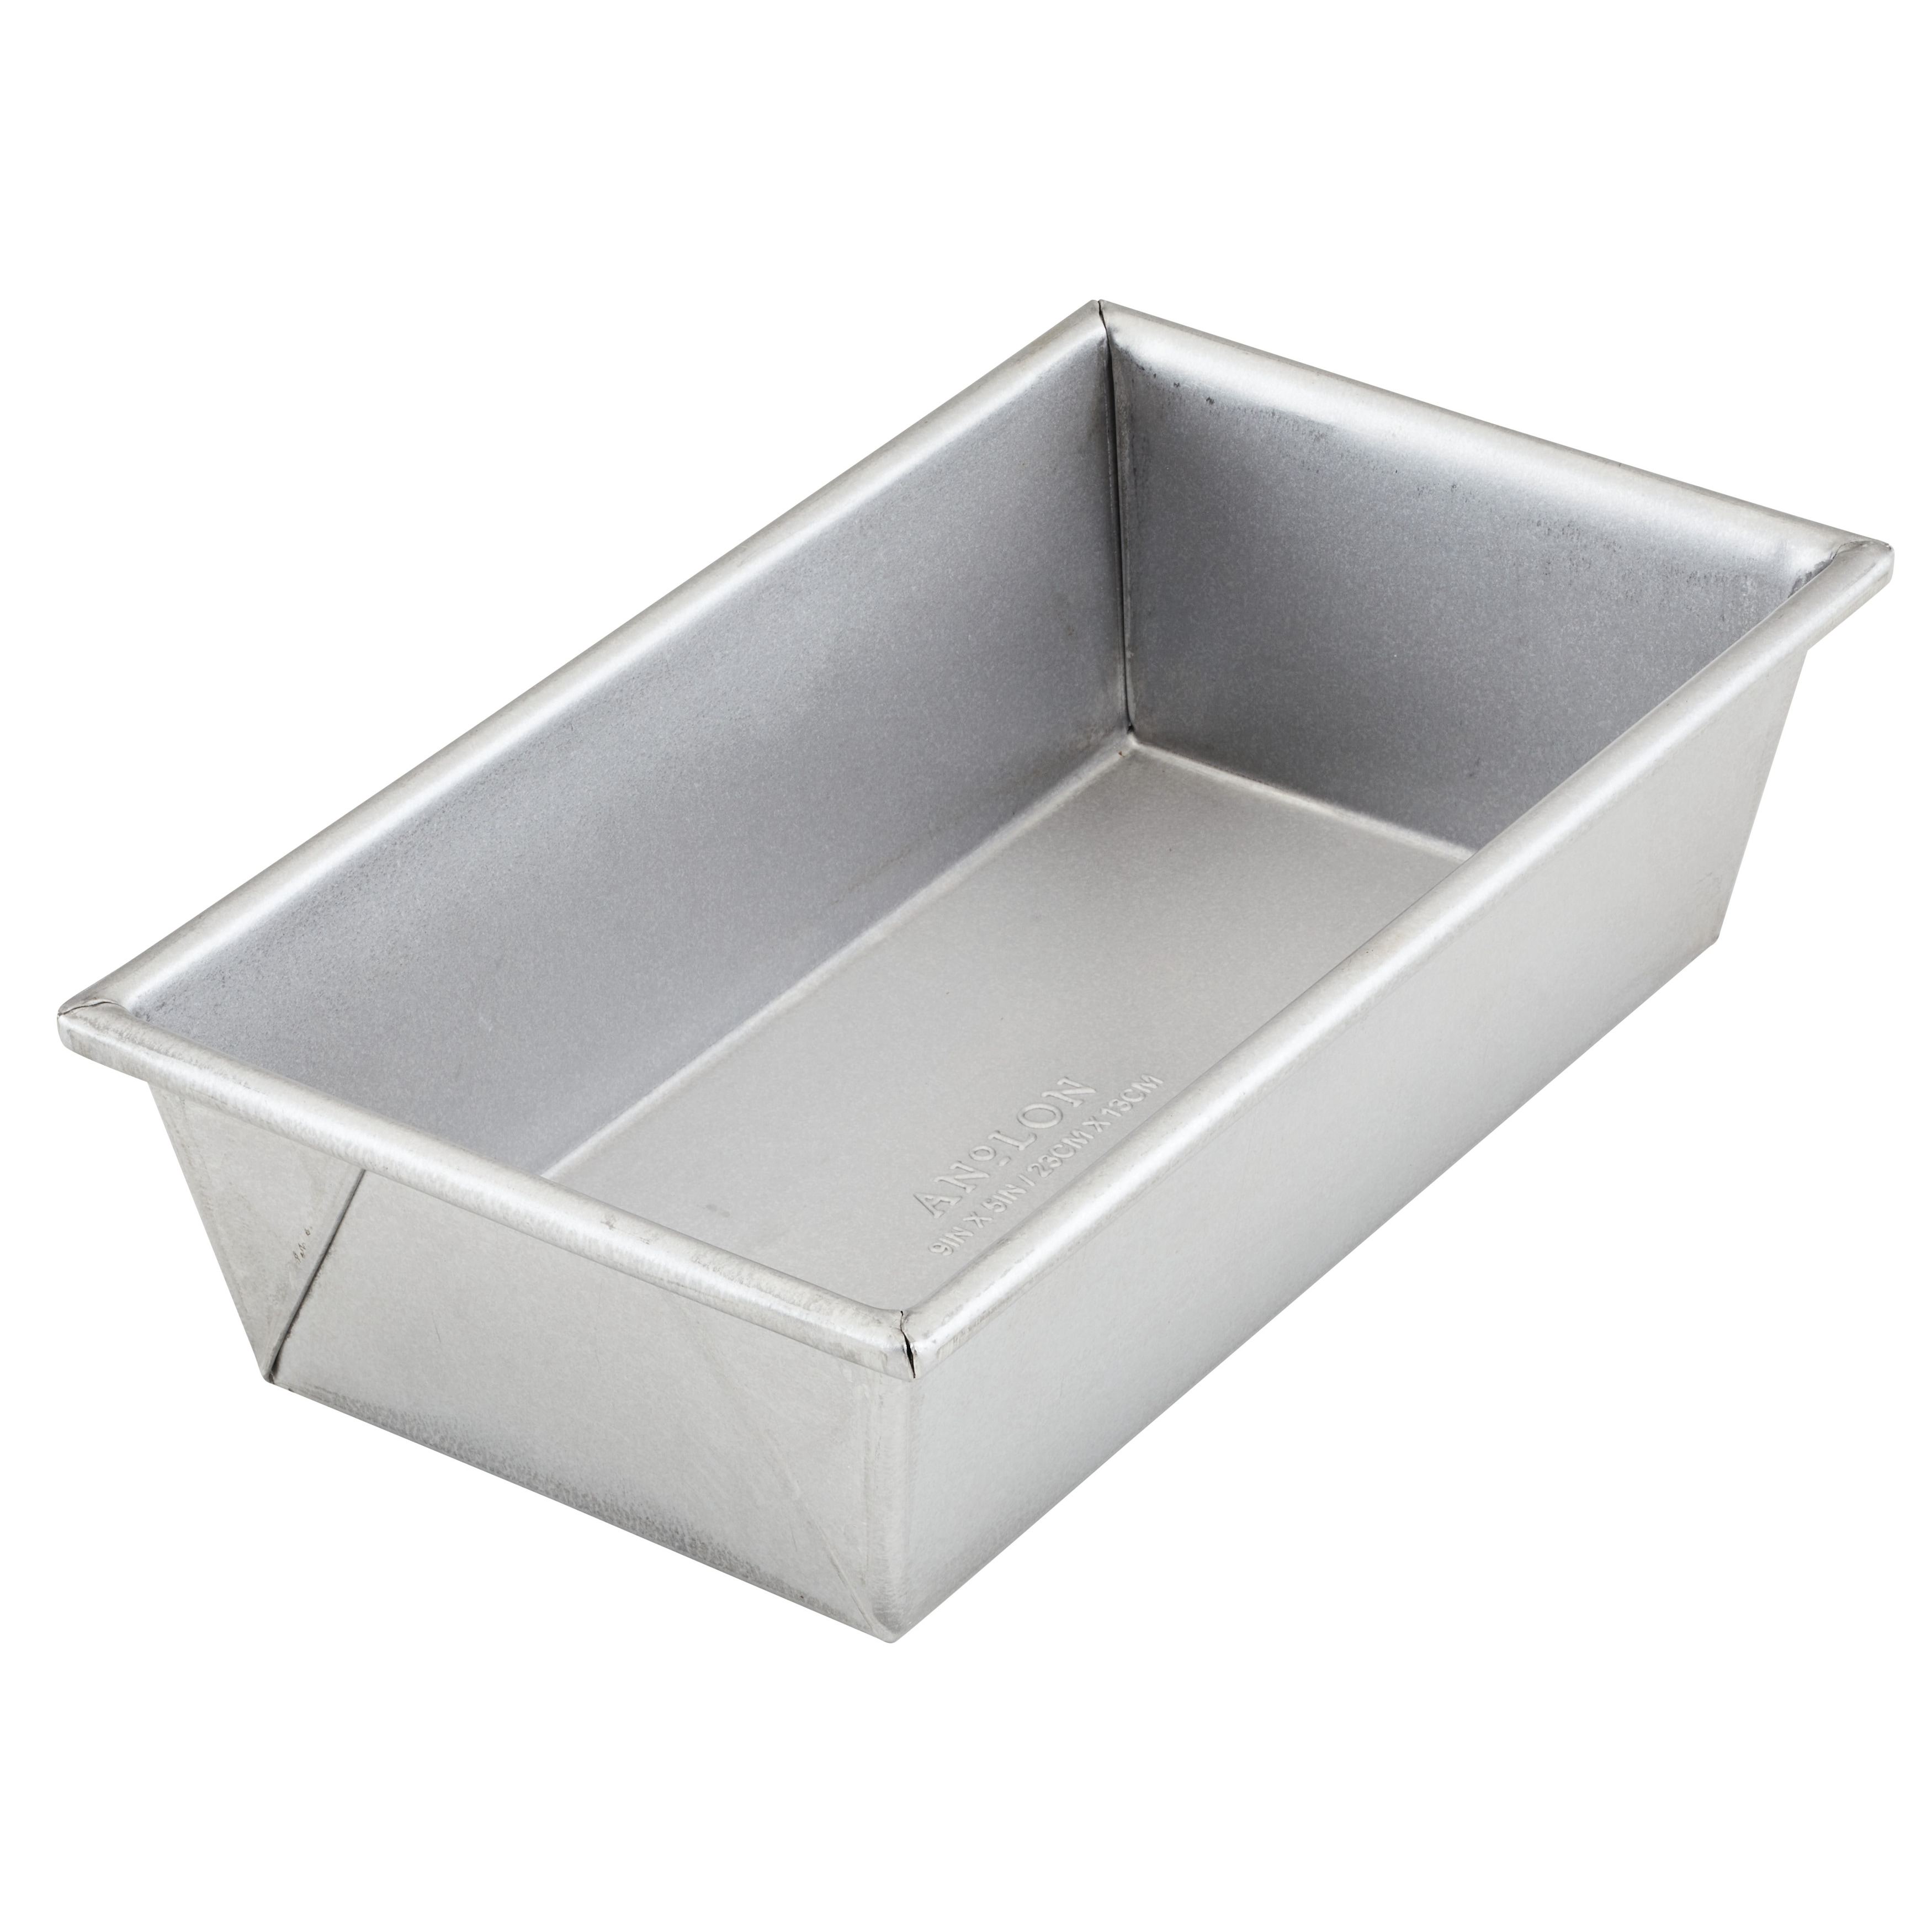 https://ak1.ostkcdn.com/images/products/is/images/direct/7ac74e7a113089c6ab6252ba093fee7dcff61fb4/Anolon-Pro-Bake-Bakeware-Aluminized-Steel-Loaf-Pan%2C-9-Inch-x-5-Inch%2C-Silver.jpg